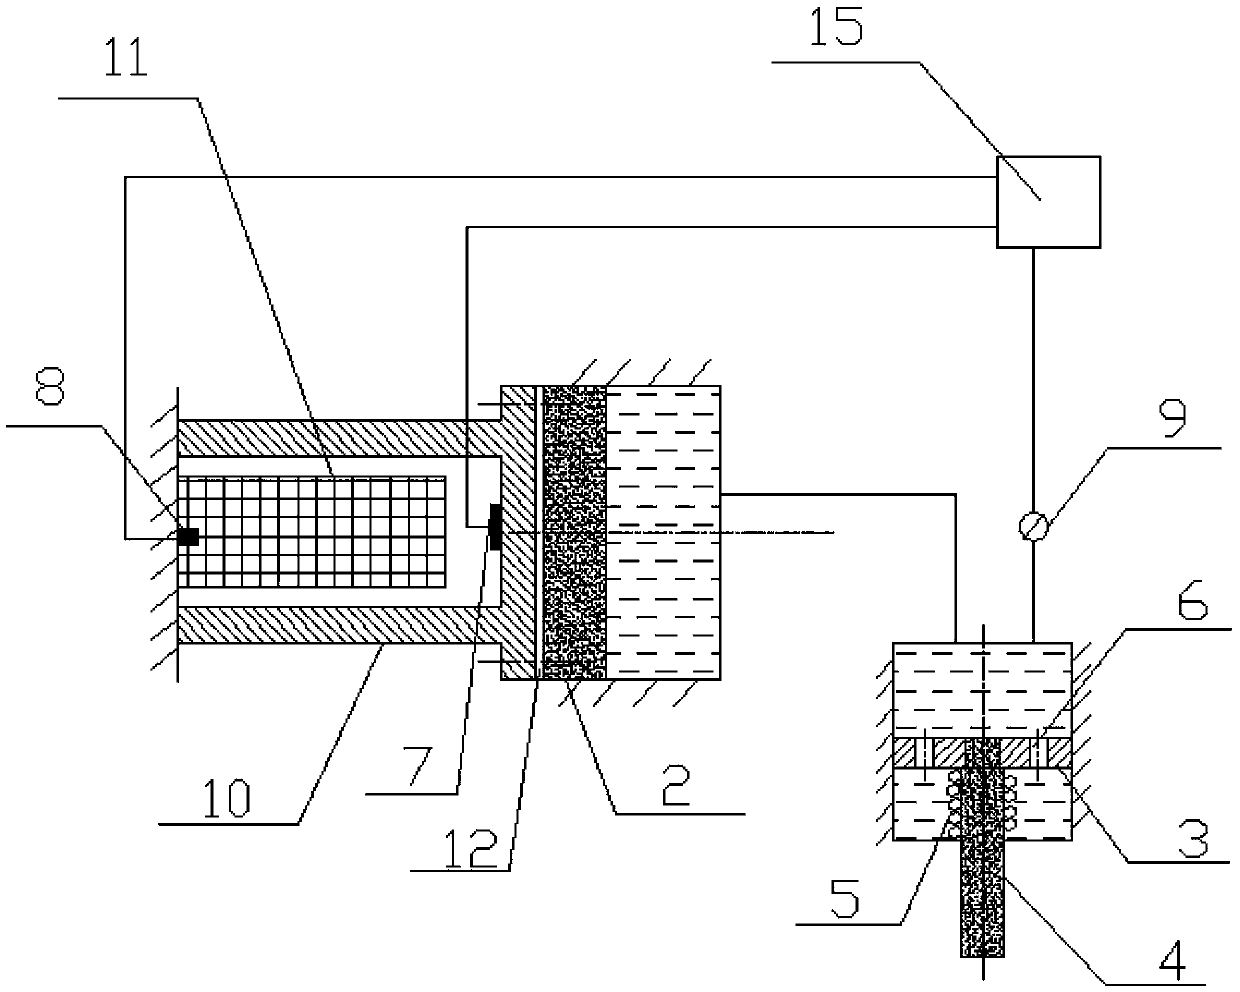 A self-locking clamping device based on thermally induced linear expansion